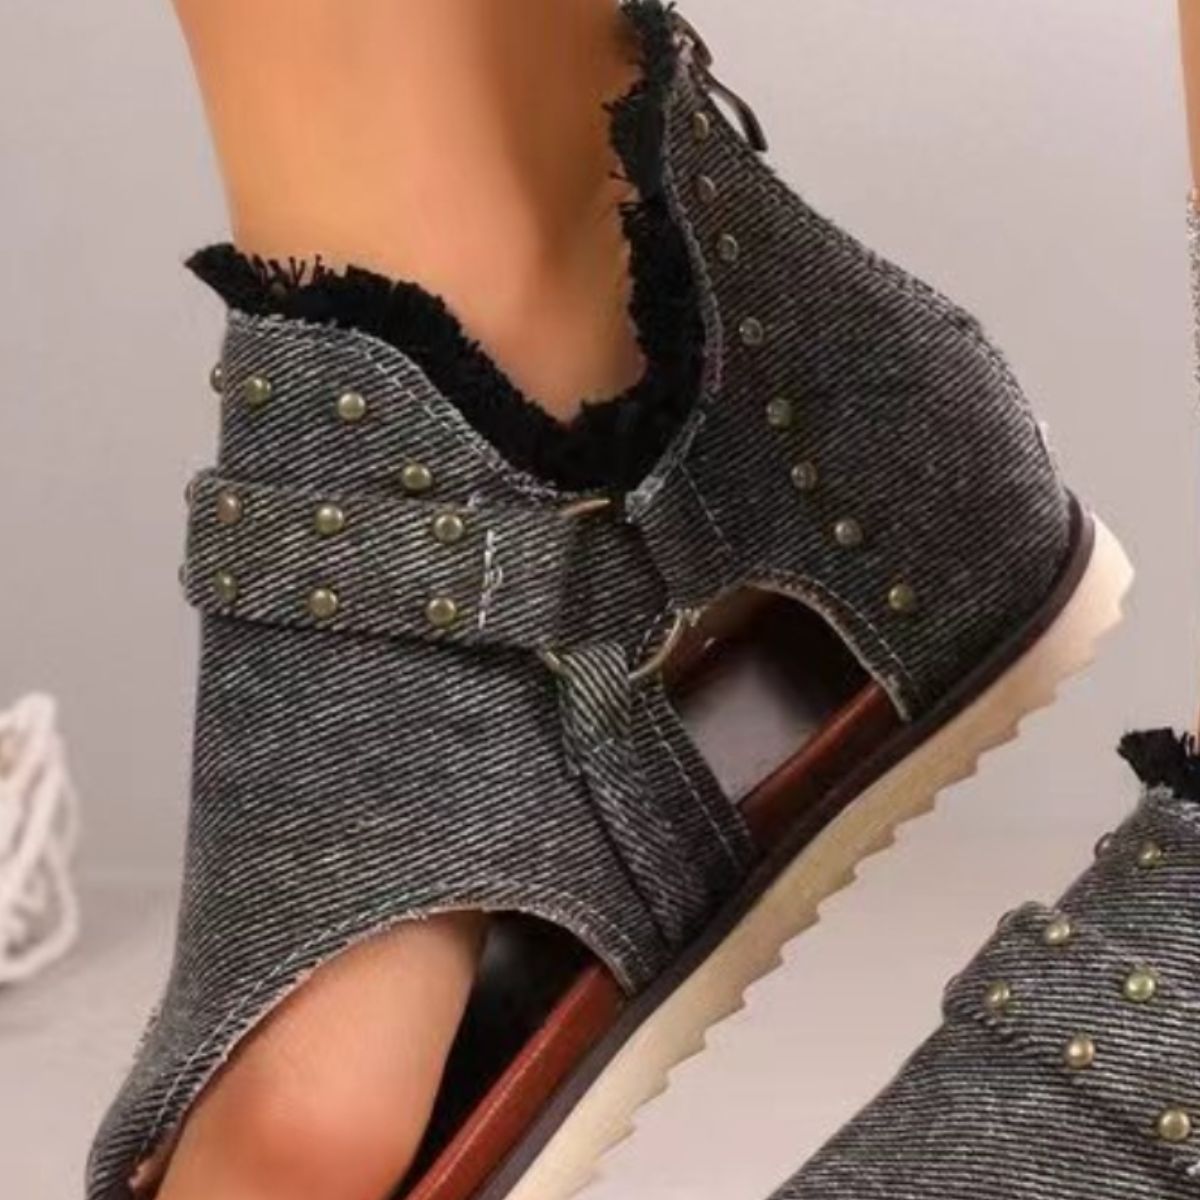 Studded Raw Hem Flat Sandals Casual Chic Boutique